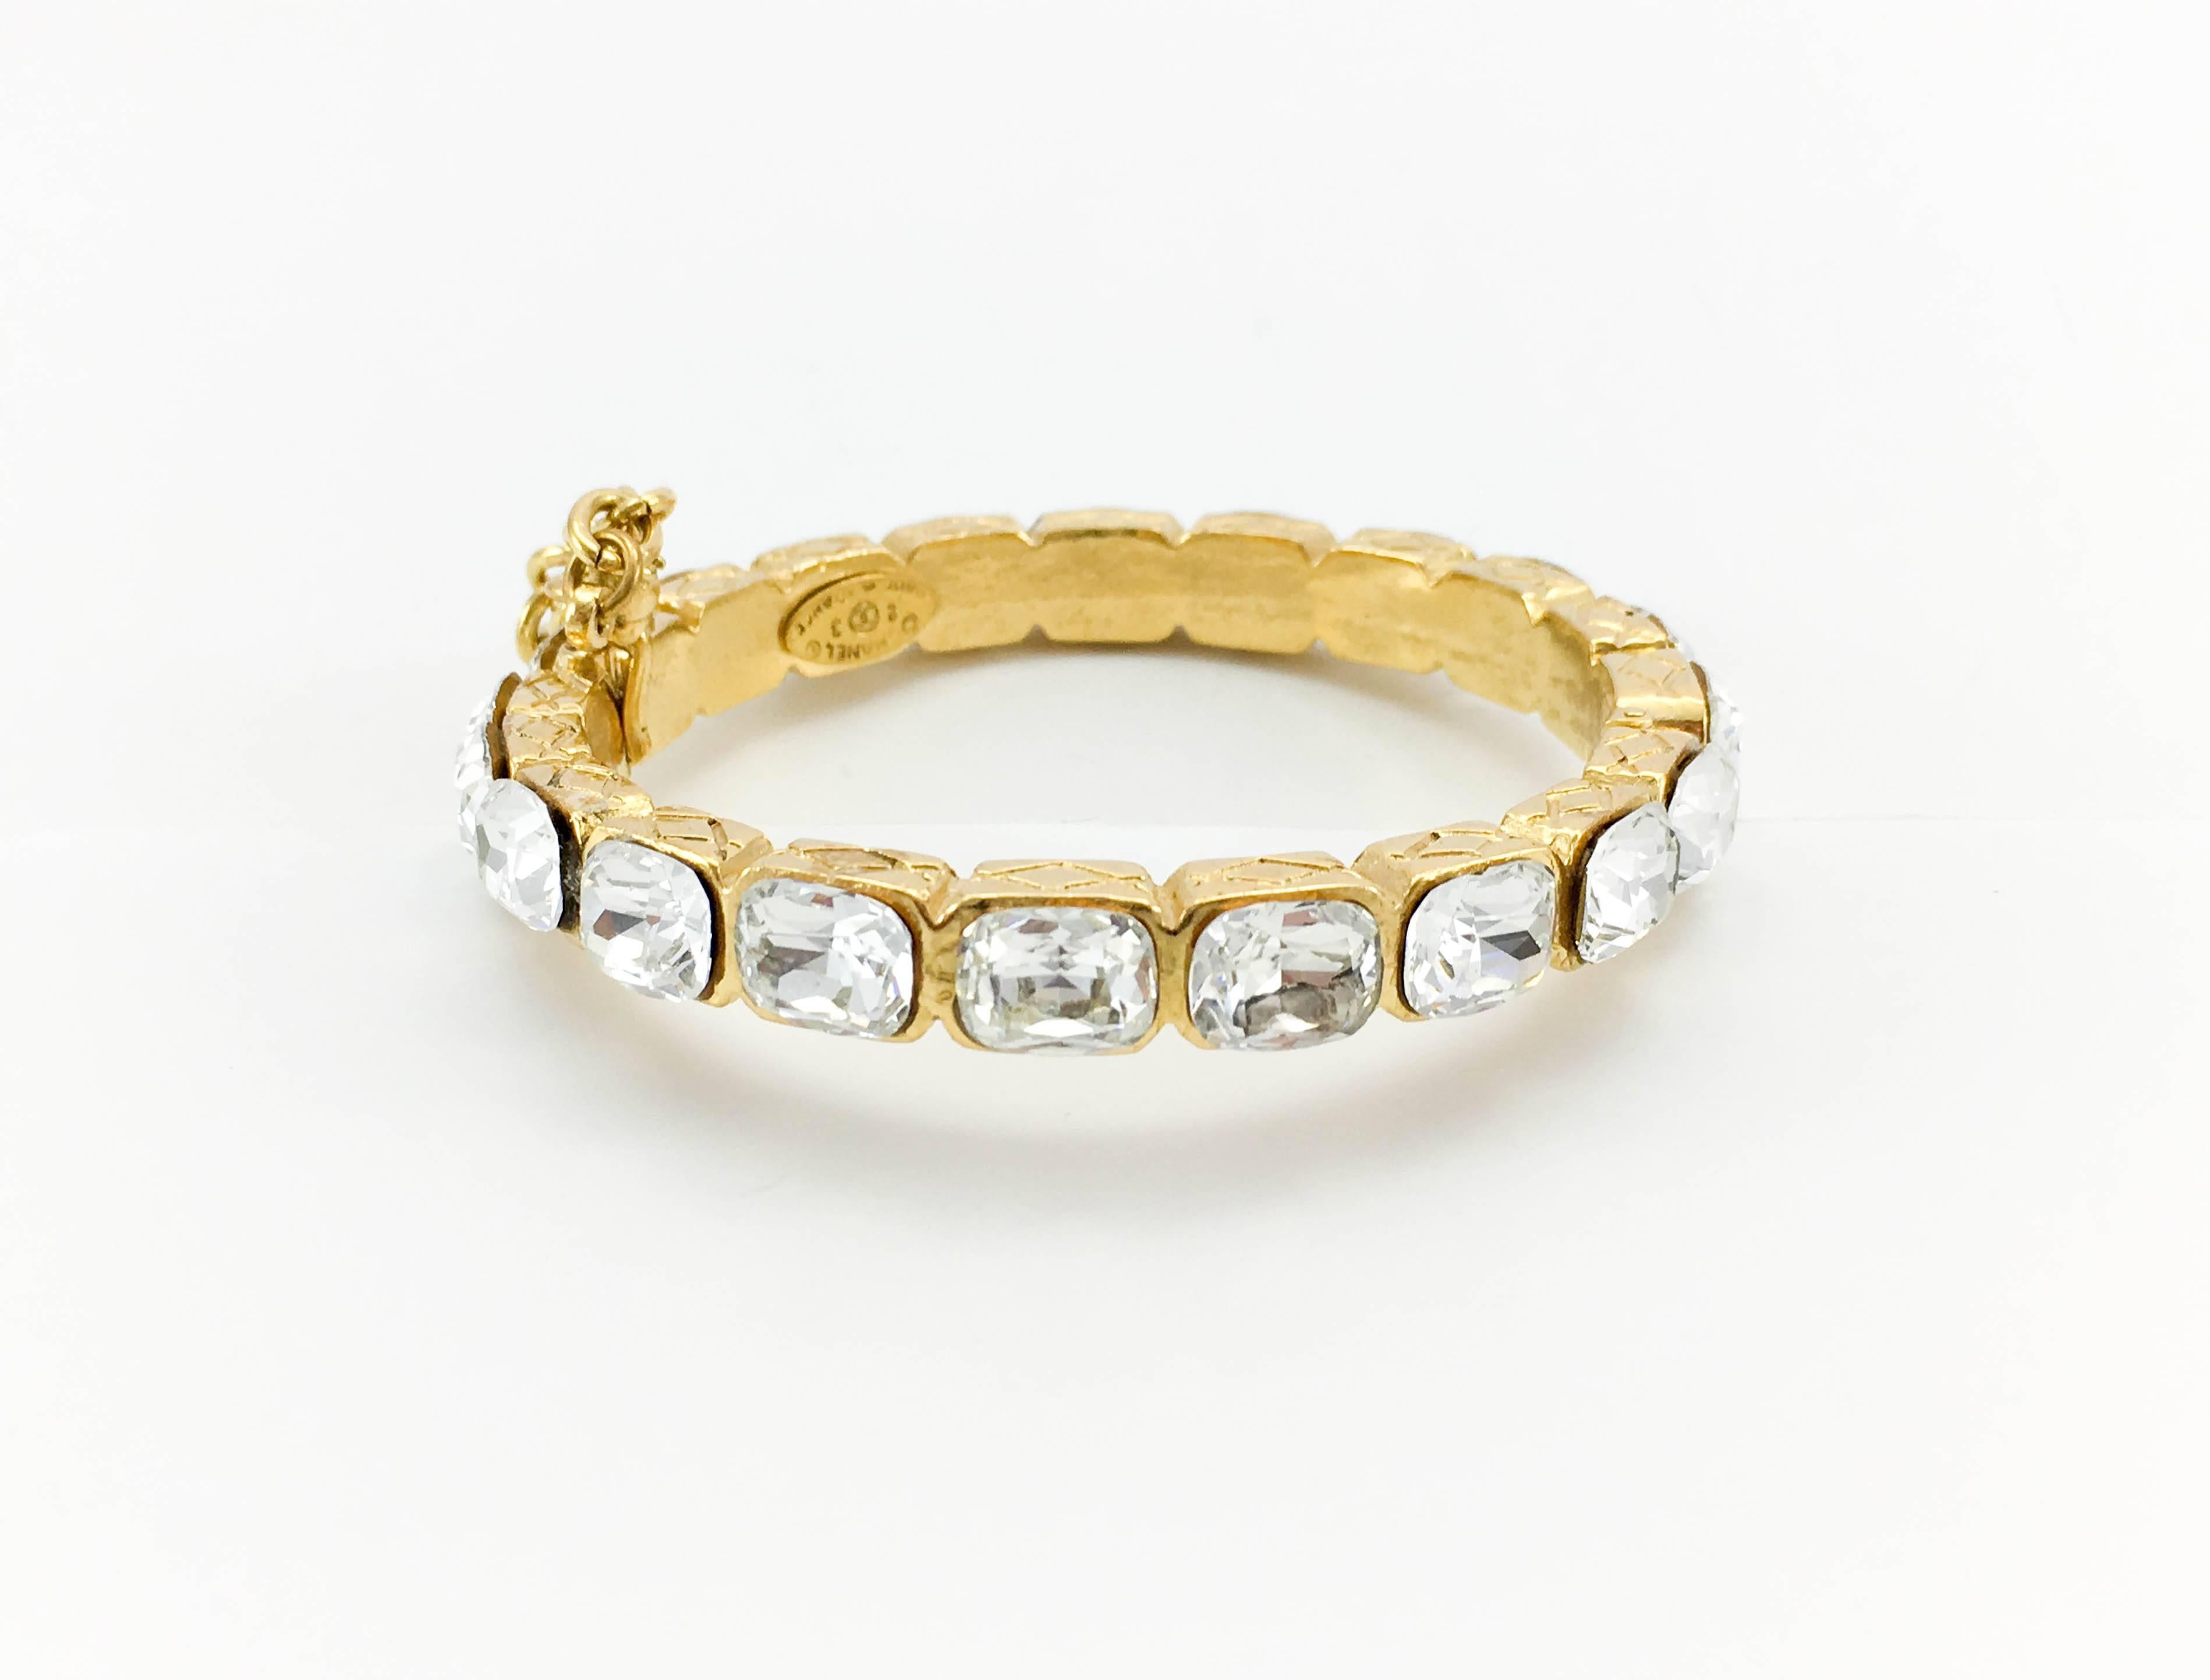 Women's 1986 Chanel Gold-Plated Quilted Bracelet Embellished With Crystals